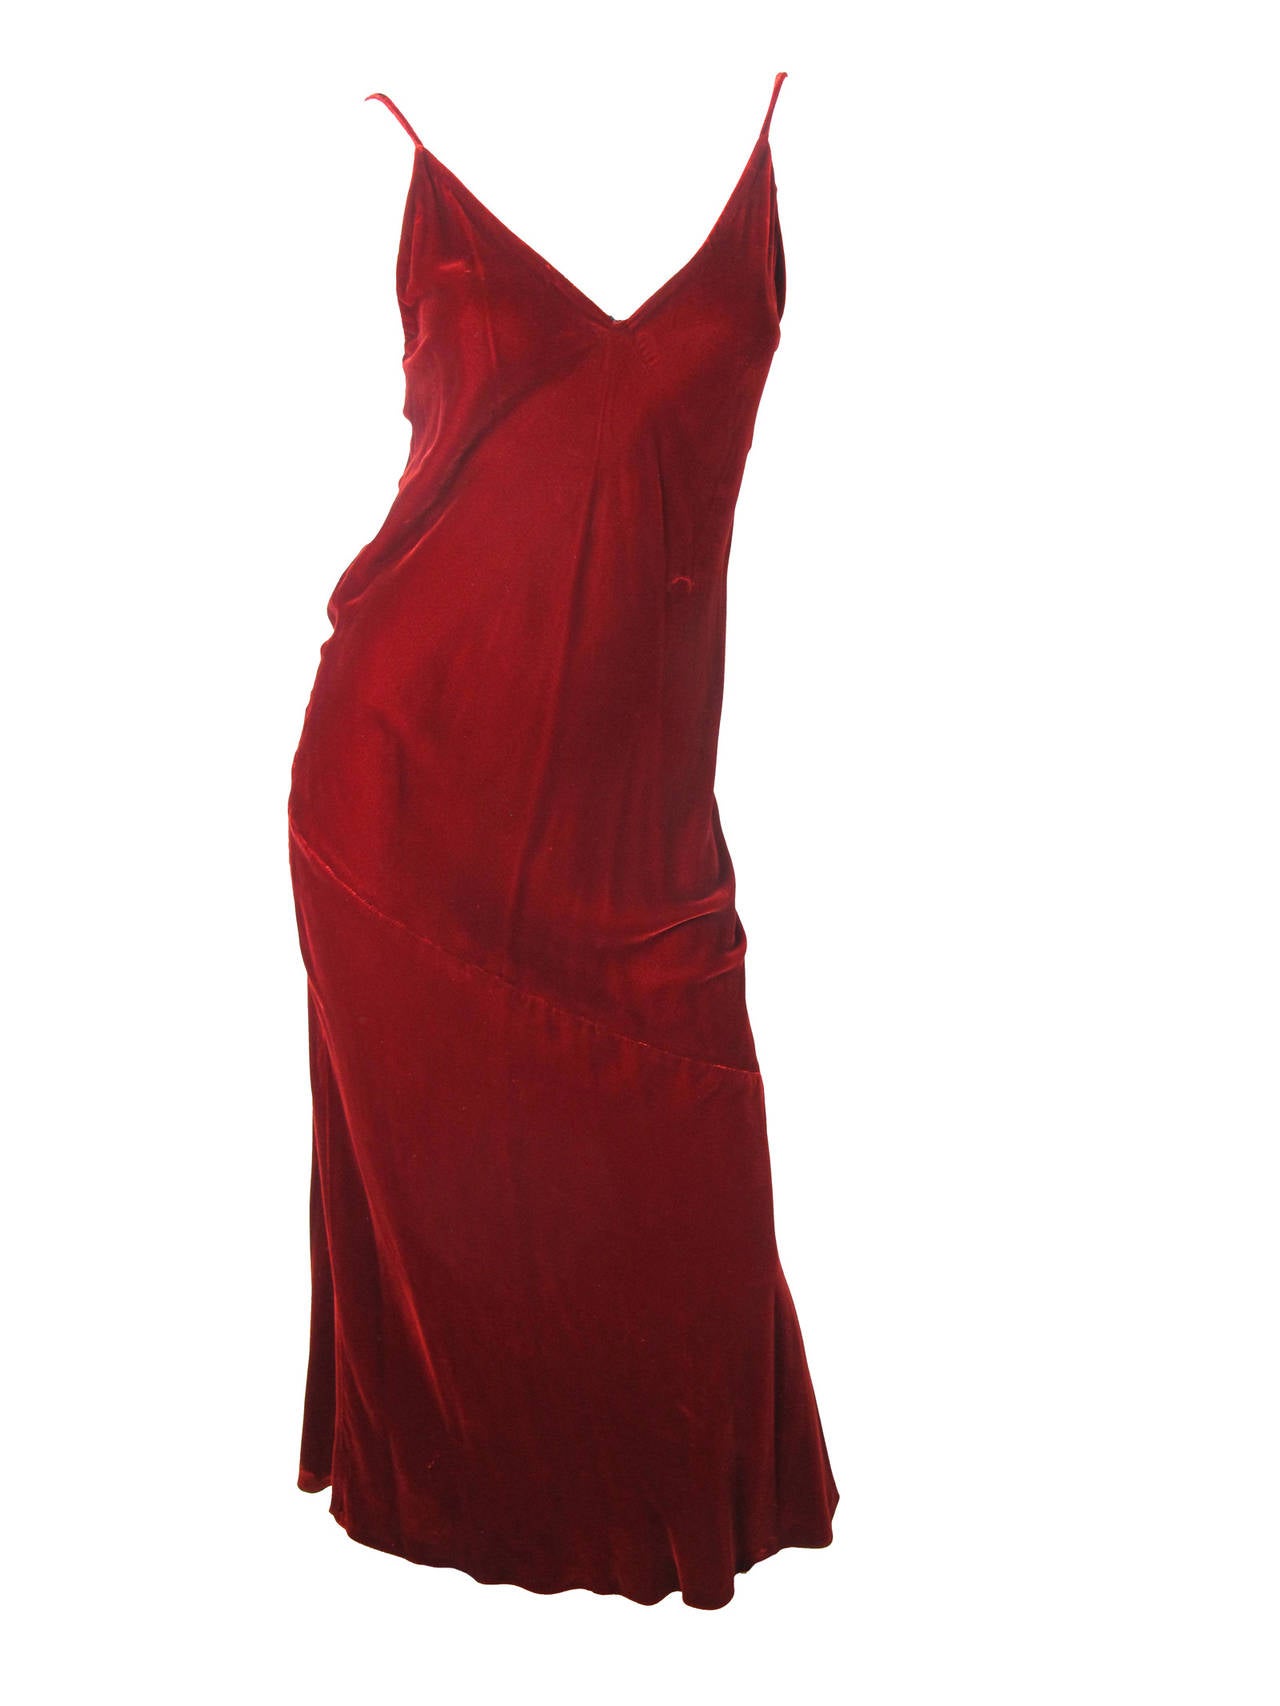 1990s Jean Paul Gaultier maroon velvet evening gown with long straps and extra large fabric covered beads - 6 1/2